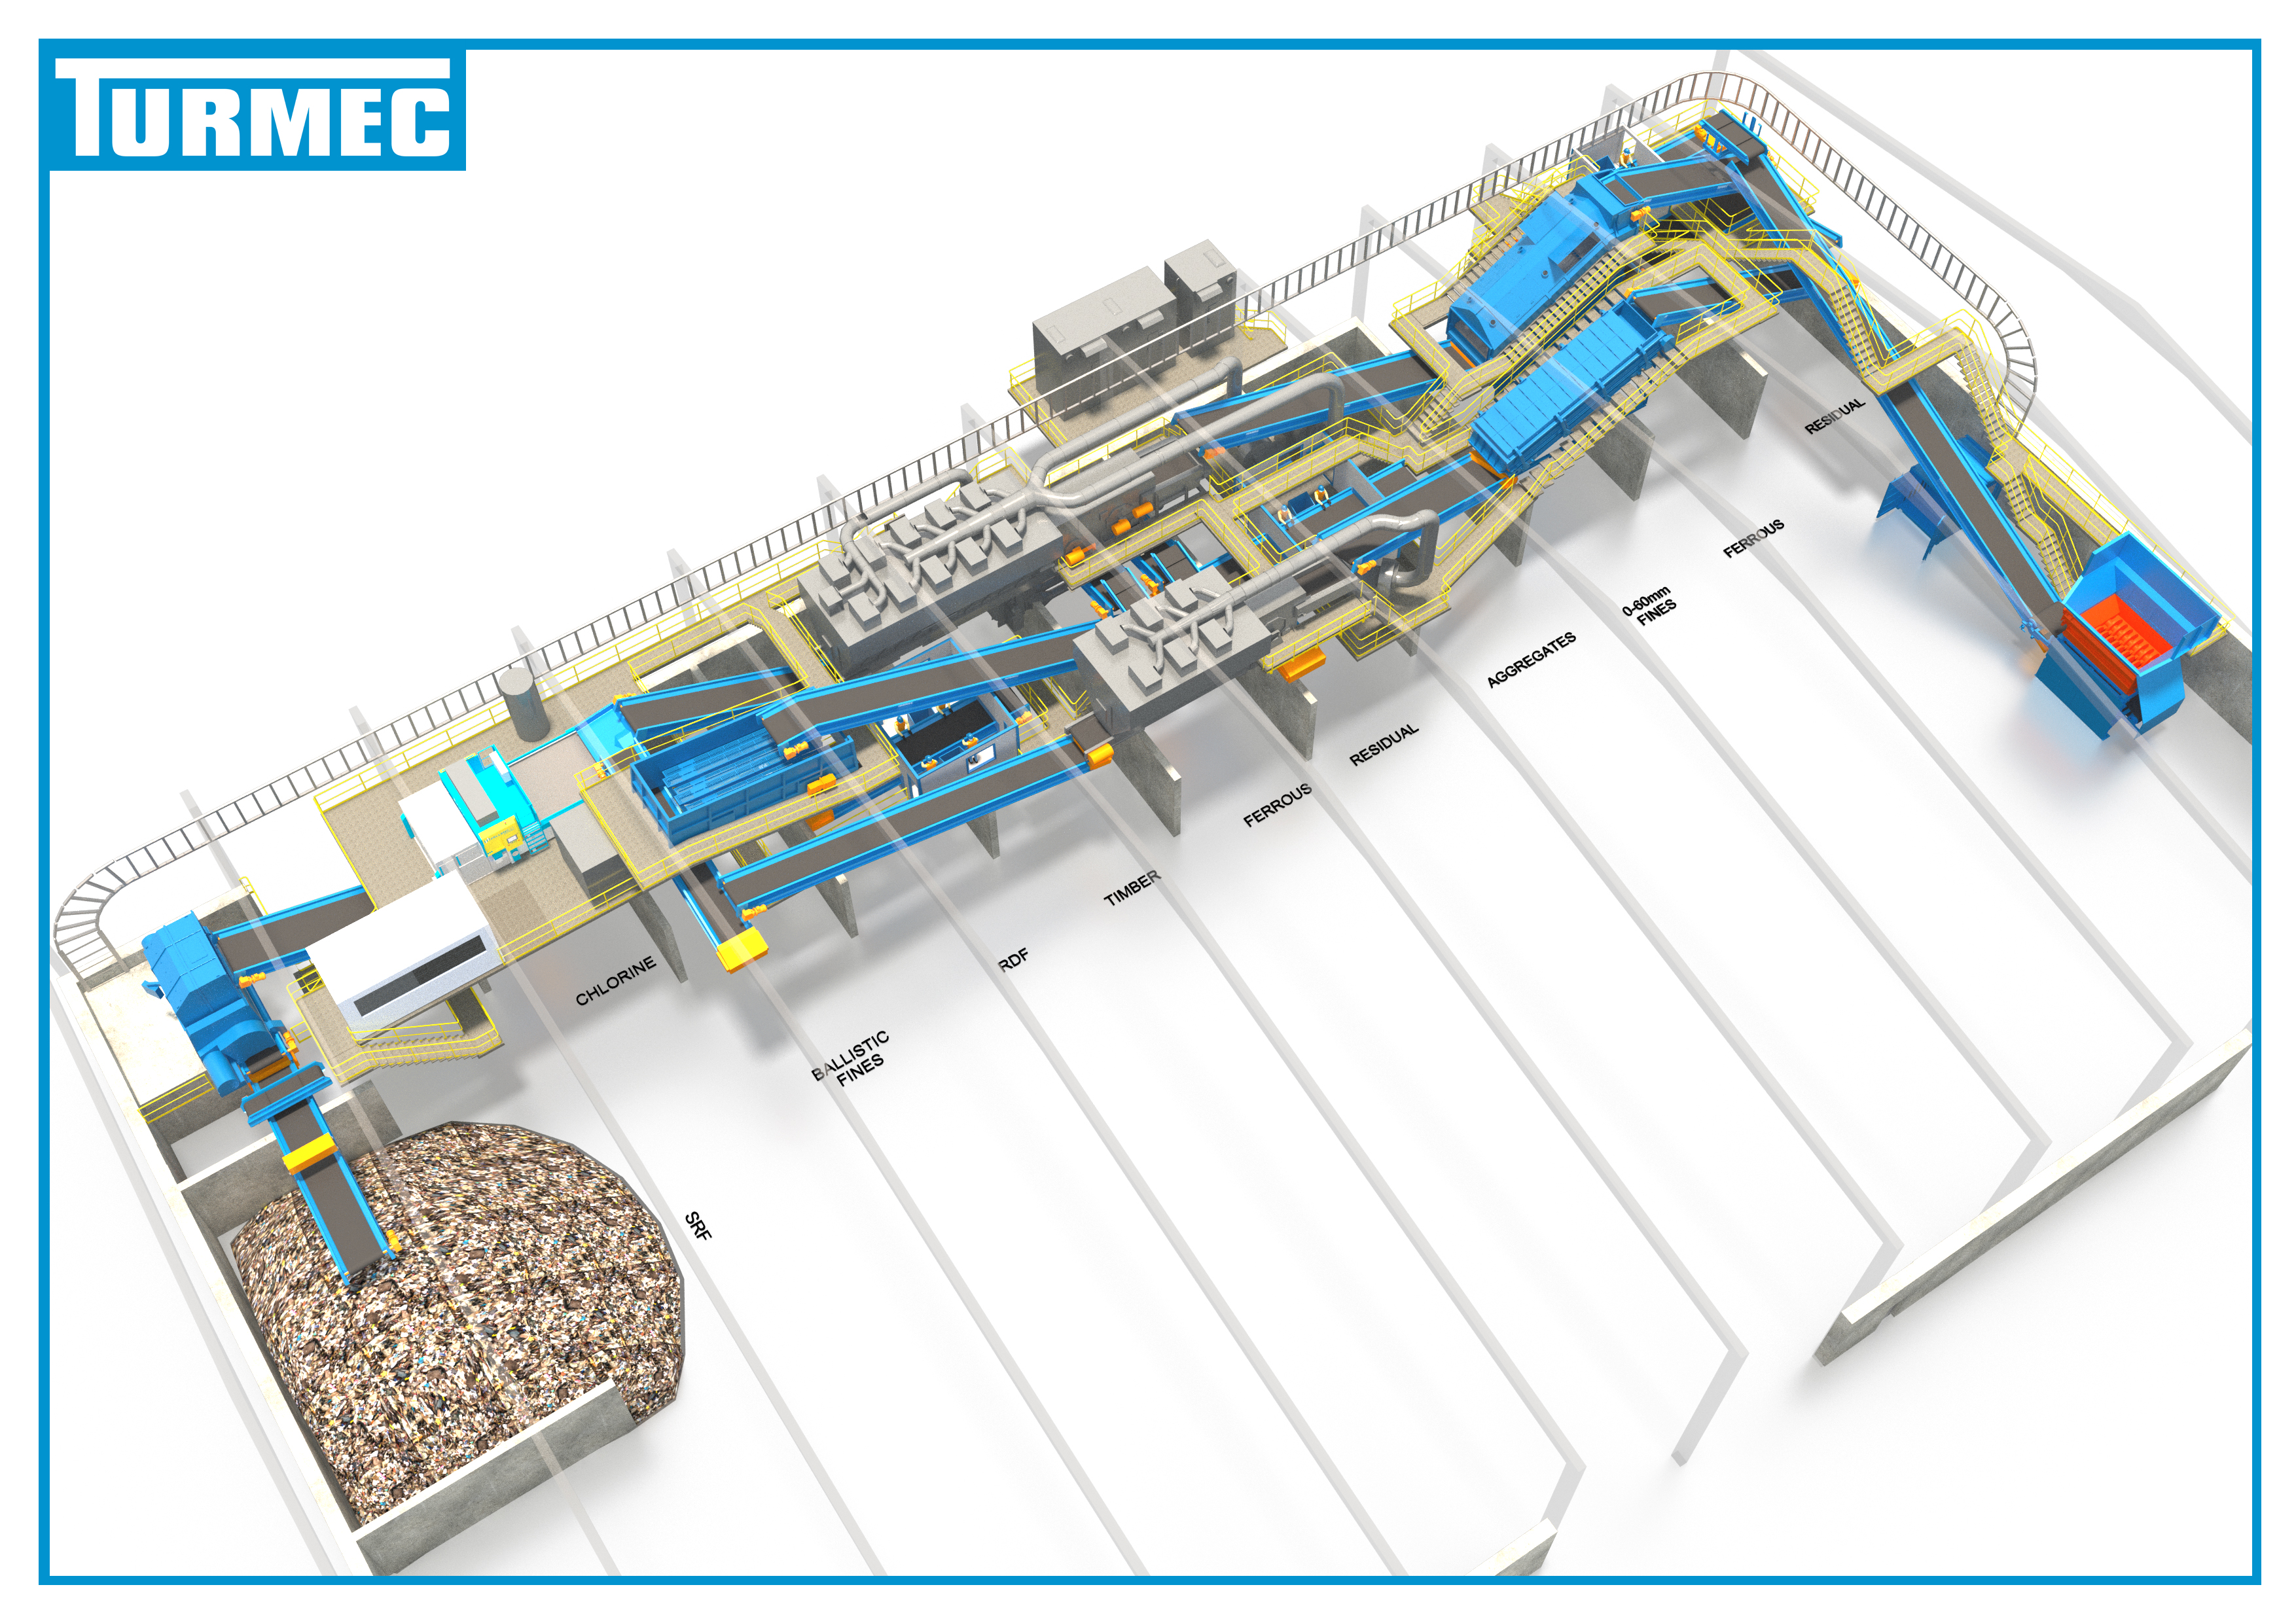 Turmec wins contract for state-of-the-art waste processing system for Wilton Recycling in Co Cavan